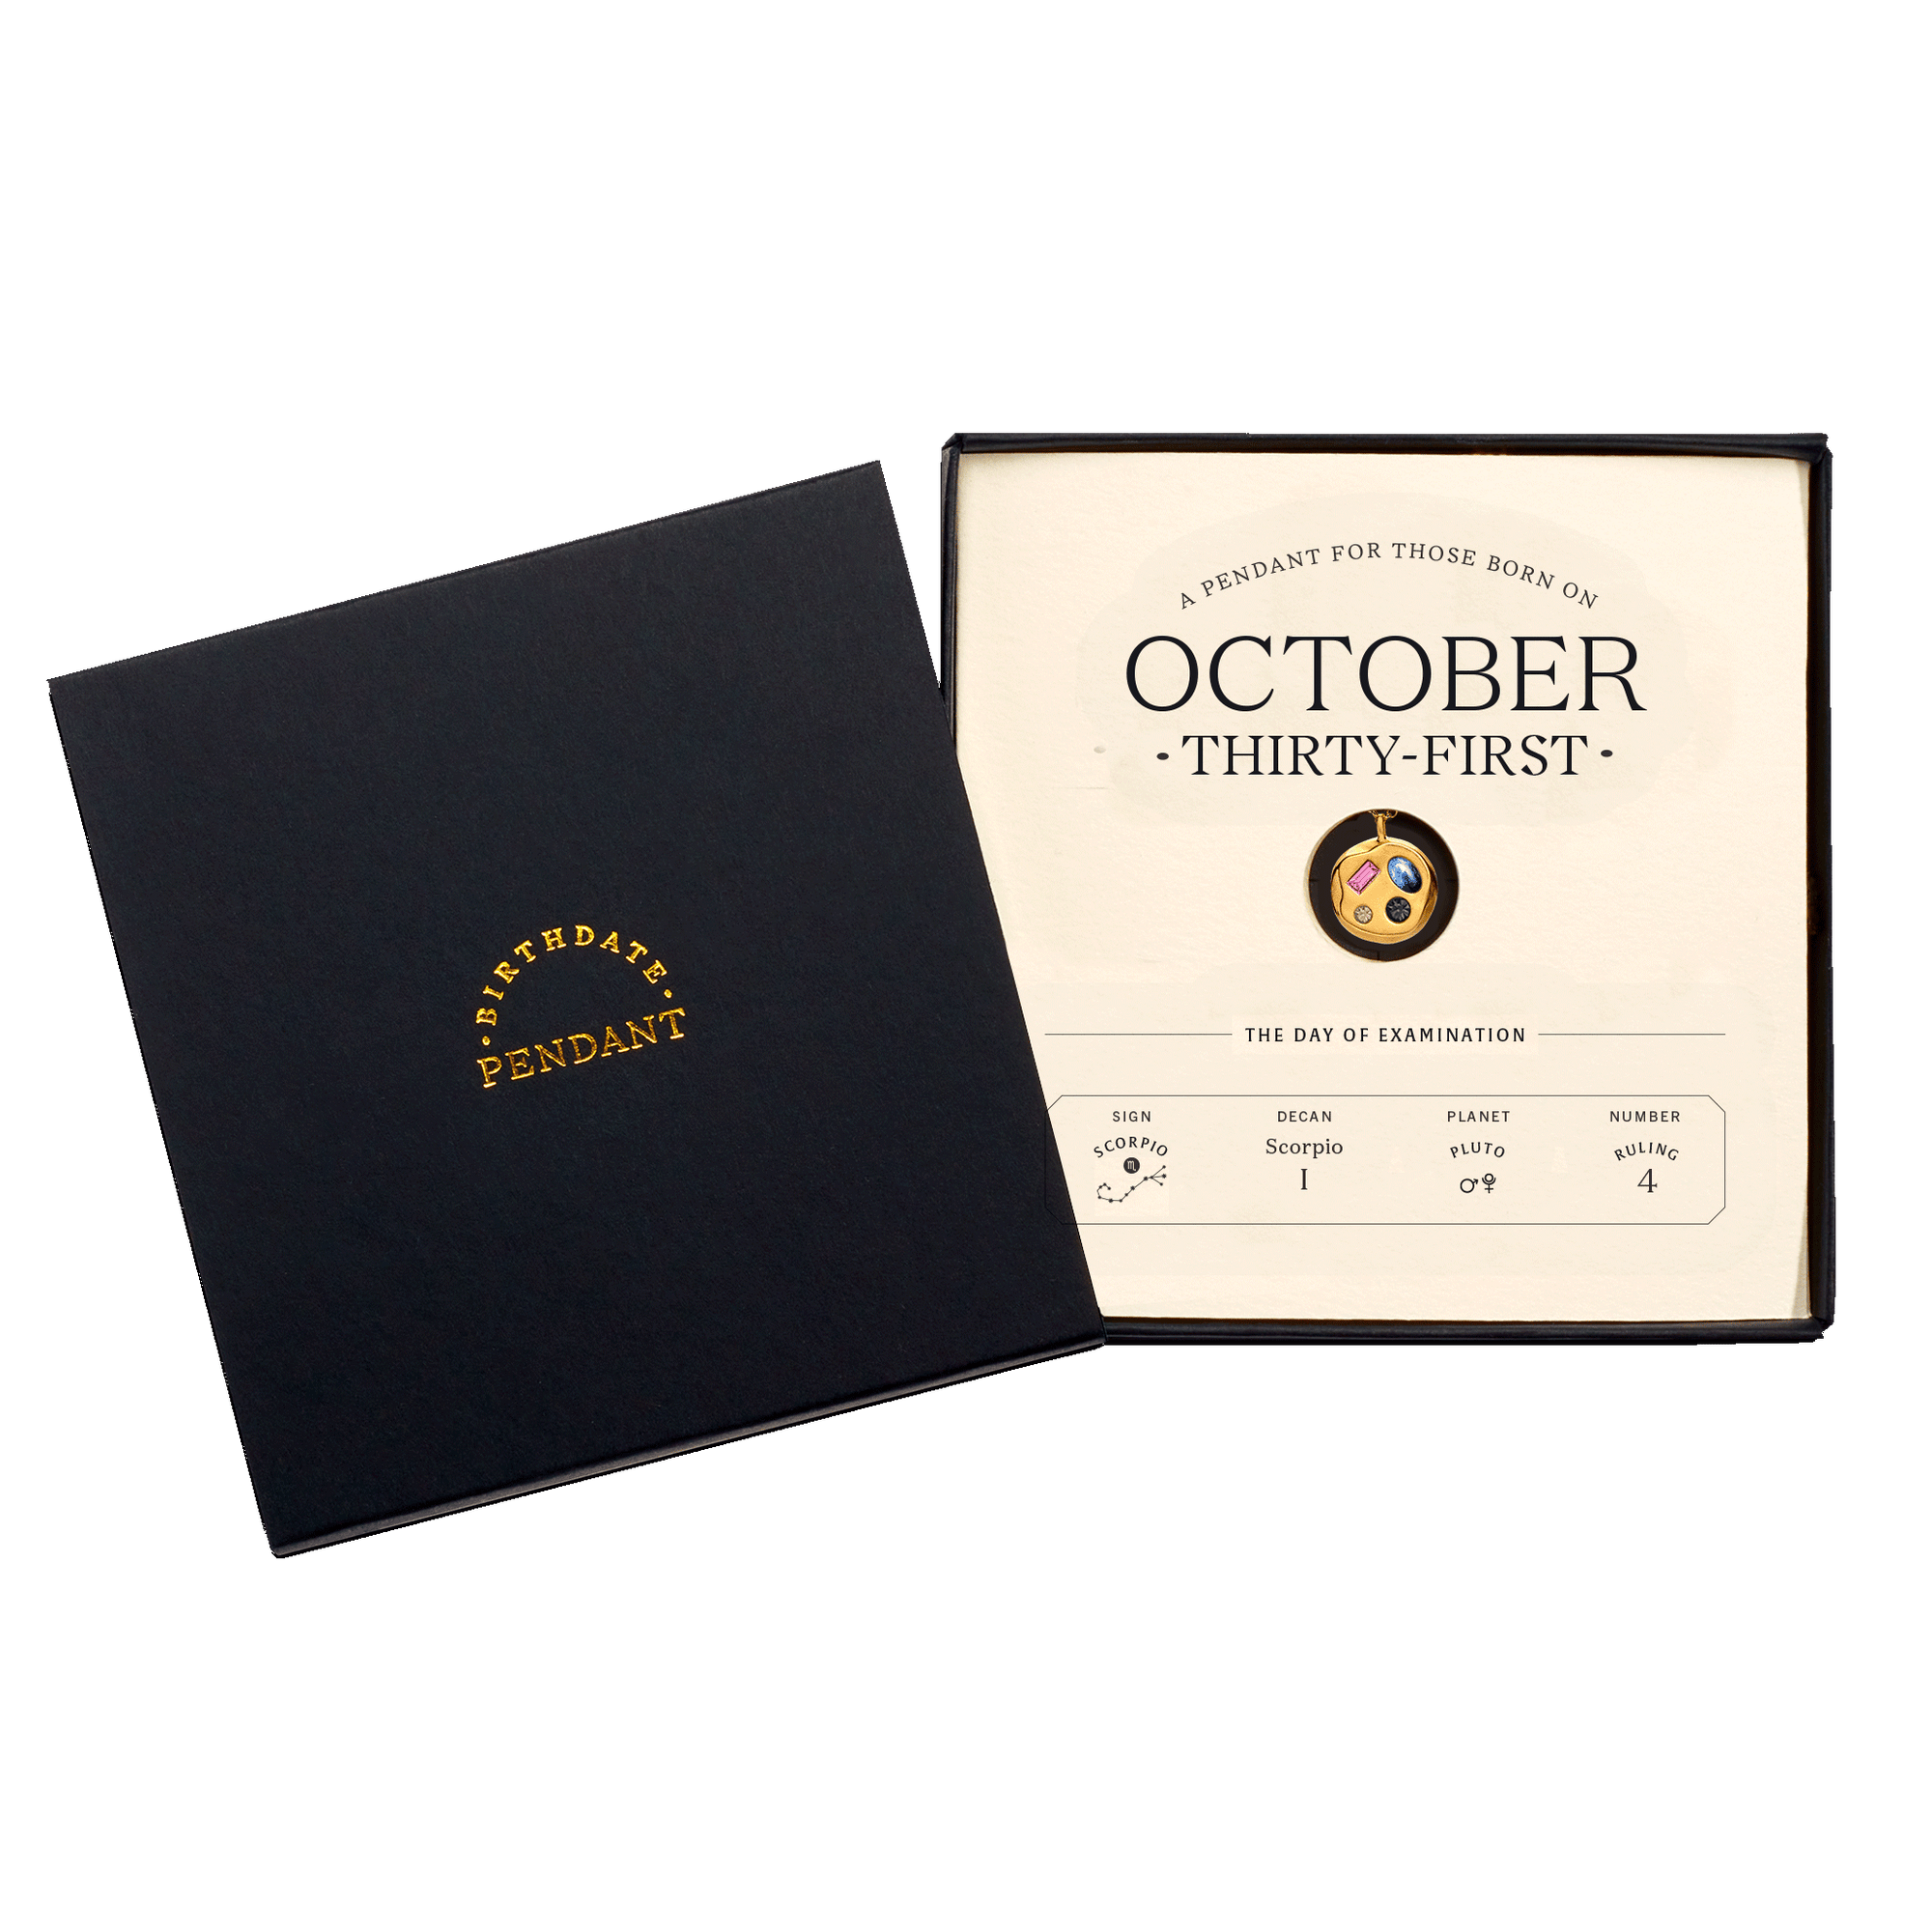 The October Thirty-First Pendant inside its box